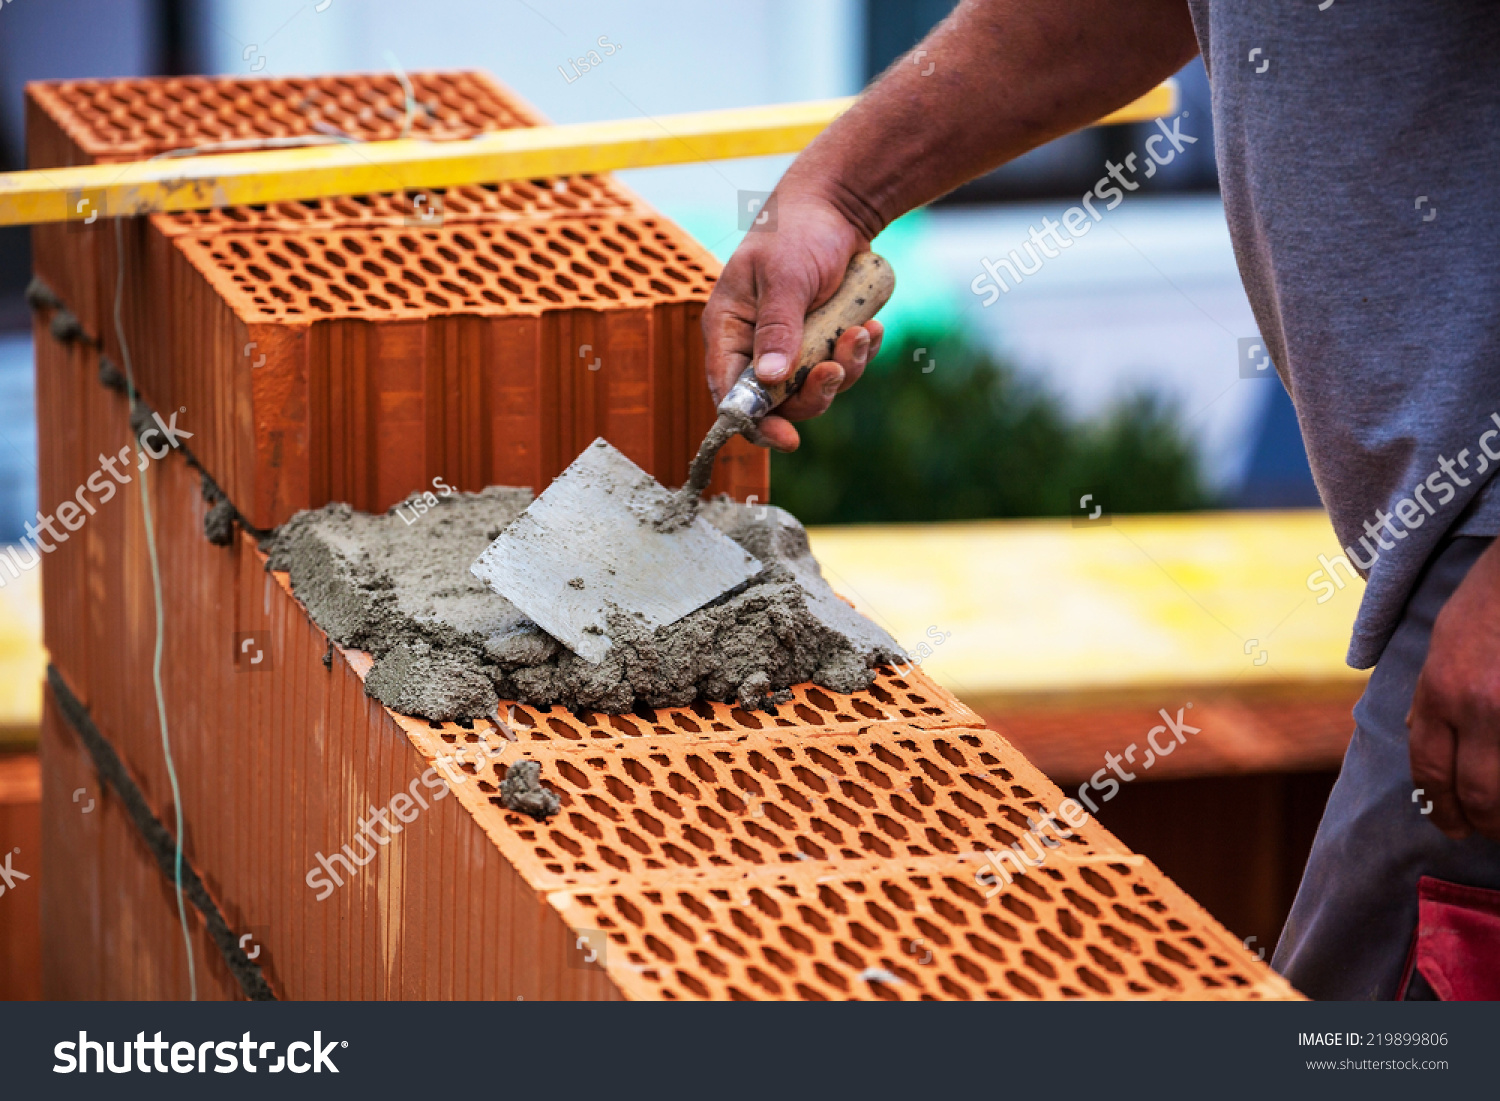 anonymous construction worker on a building site when building a house built a wall of brick. brick wall of a solid house. symbolic image for illegal work and bungling #219899806